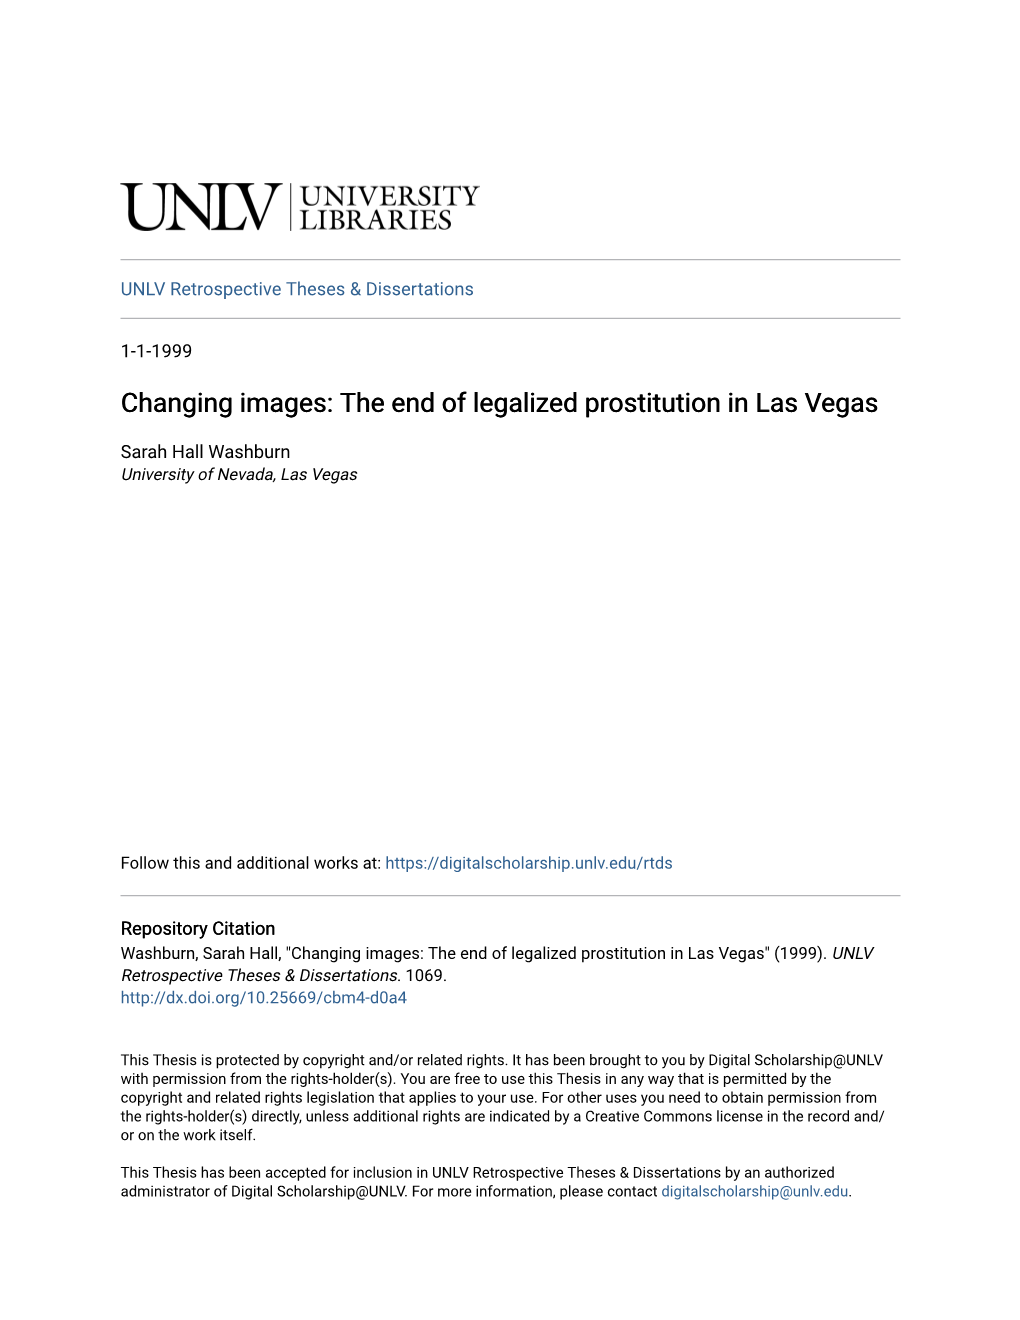 Changing Images: the End of Legalized Prostitution in Las Vegas